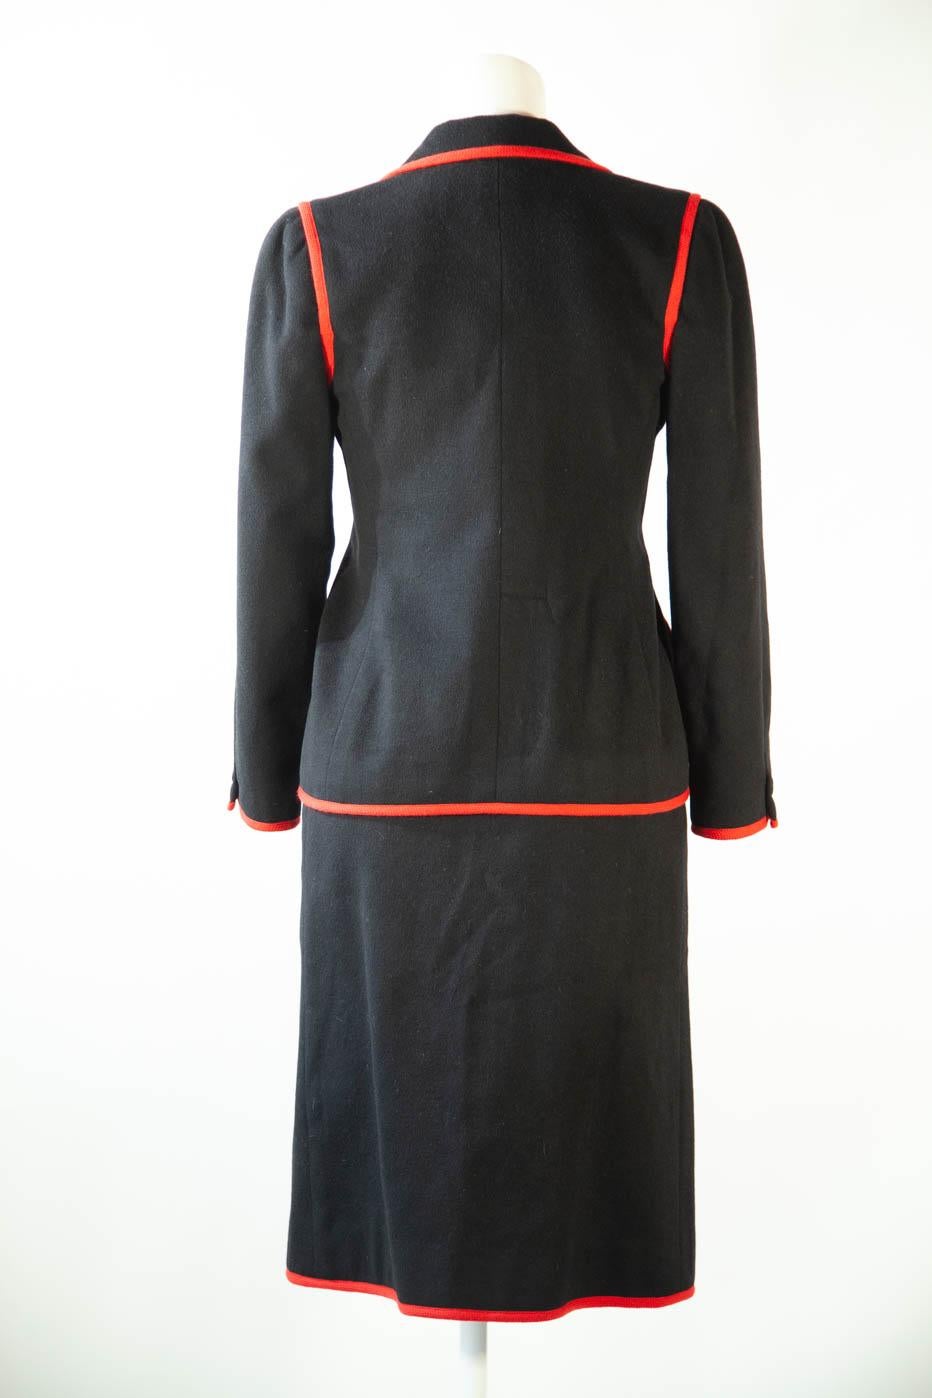 Nina Ricci black ensemble  In Excellent Condition For Sale In Kingston, NY